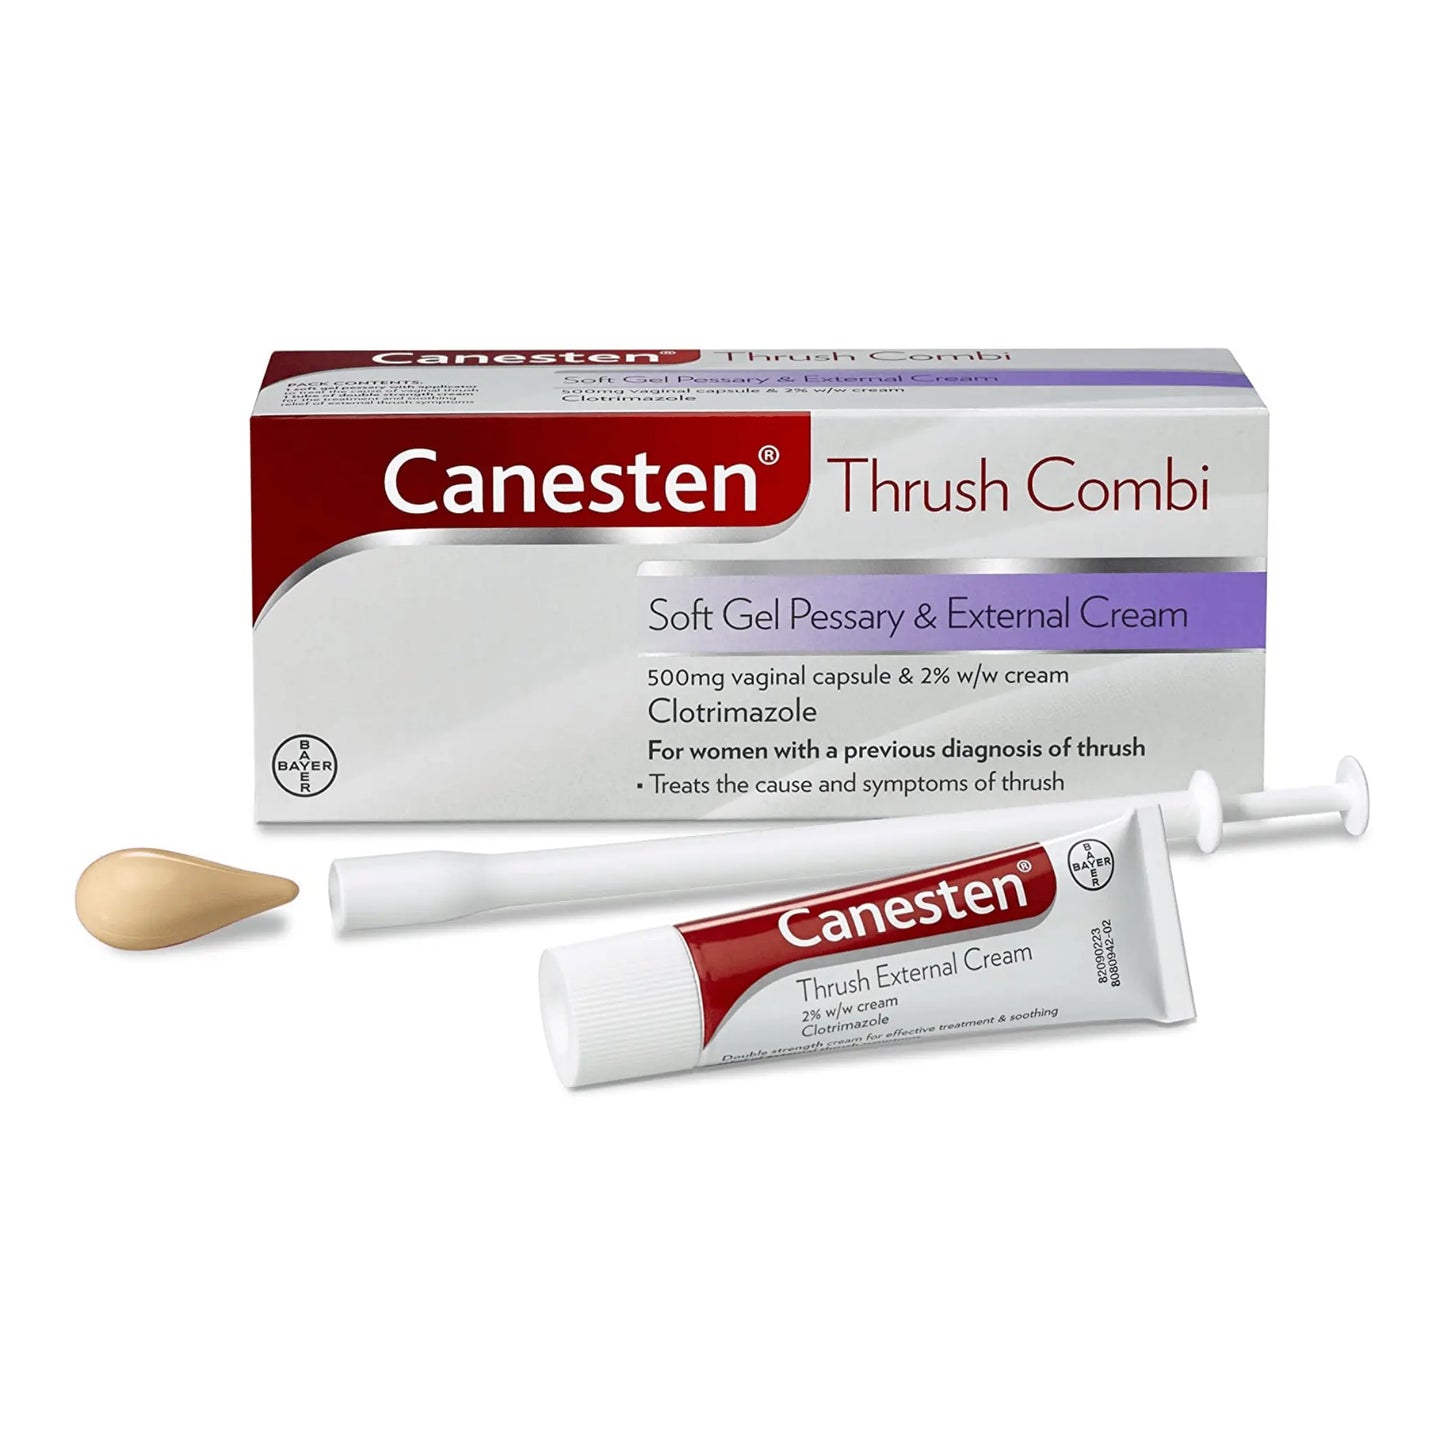 How To Control Vaginal Infection with Canesten Thrush Combi Pessary & External Cream?